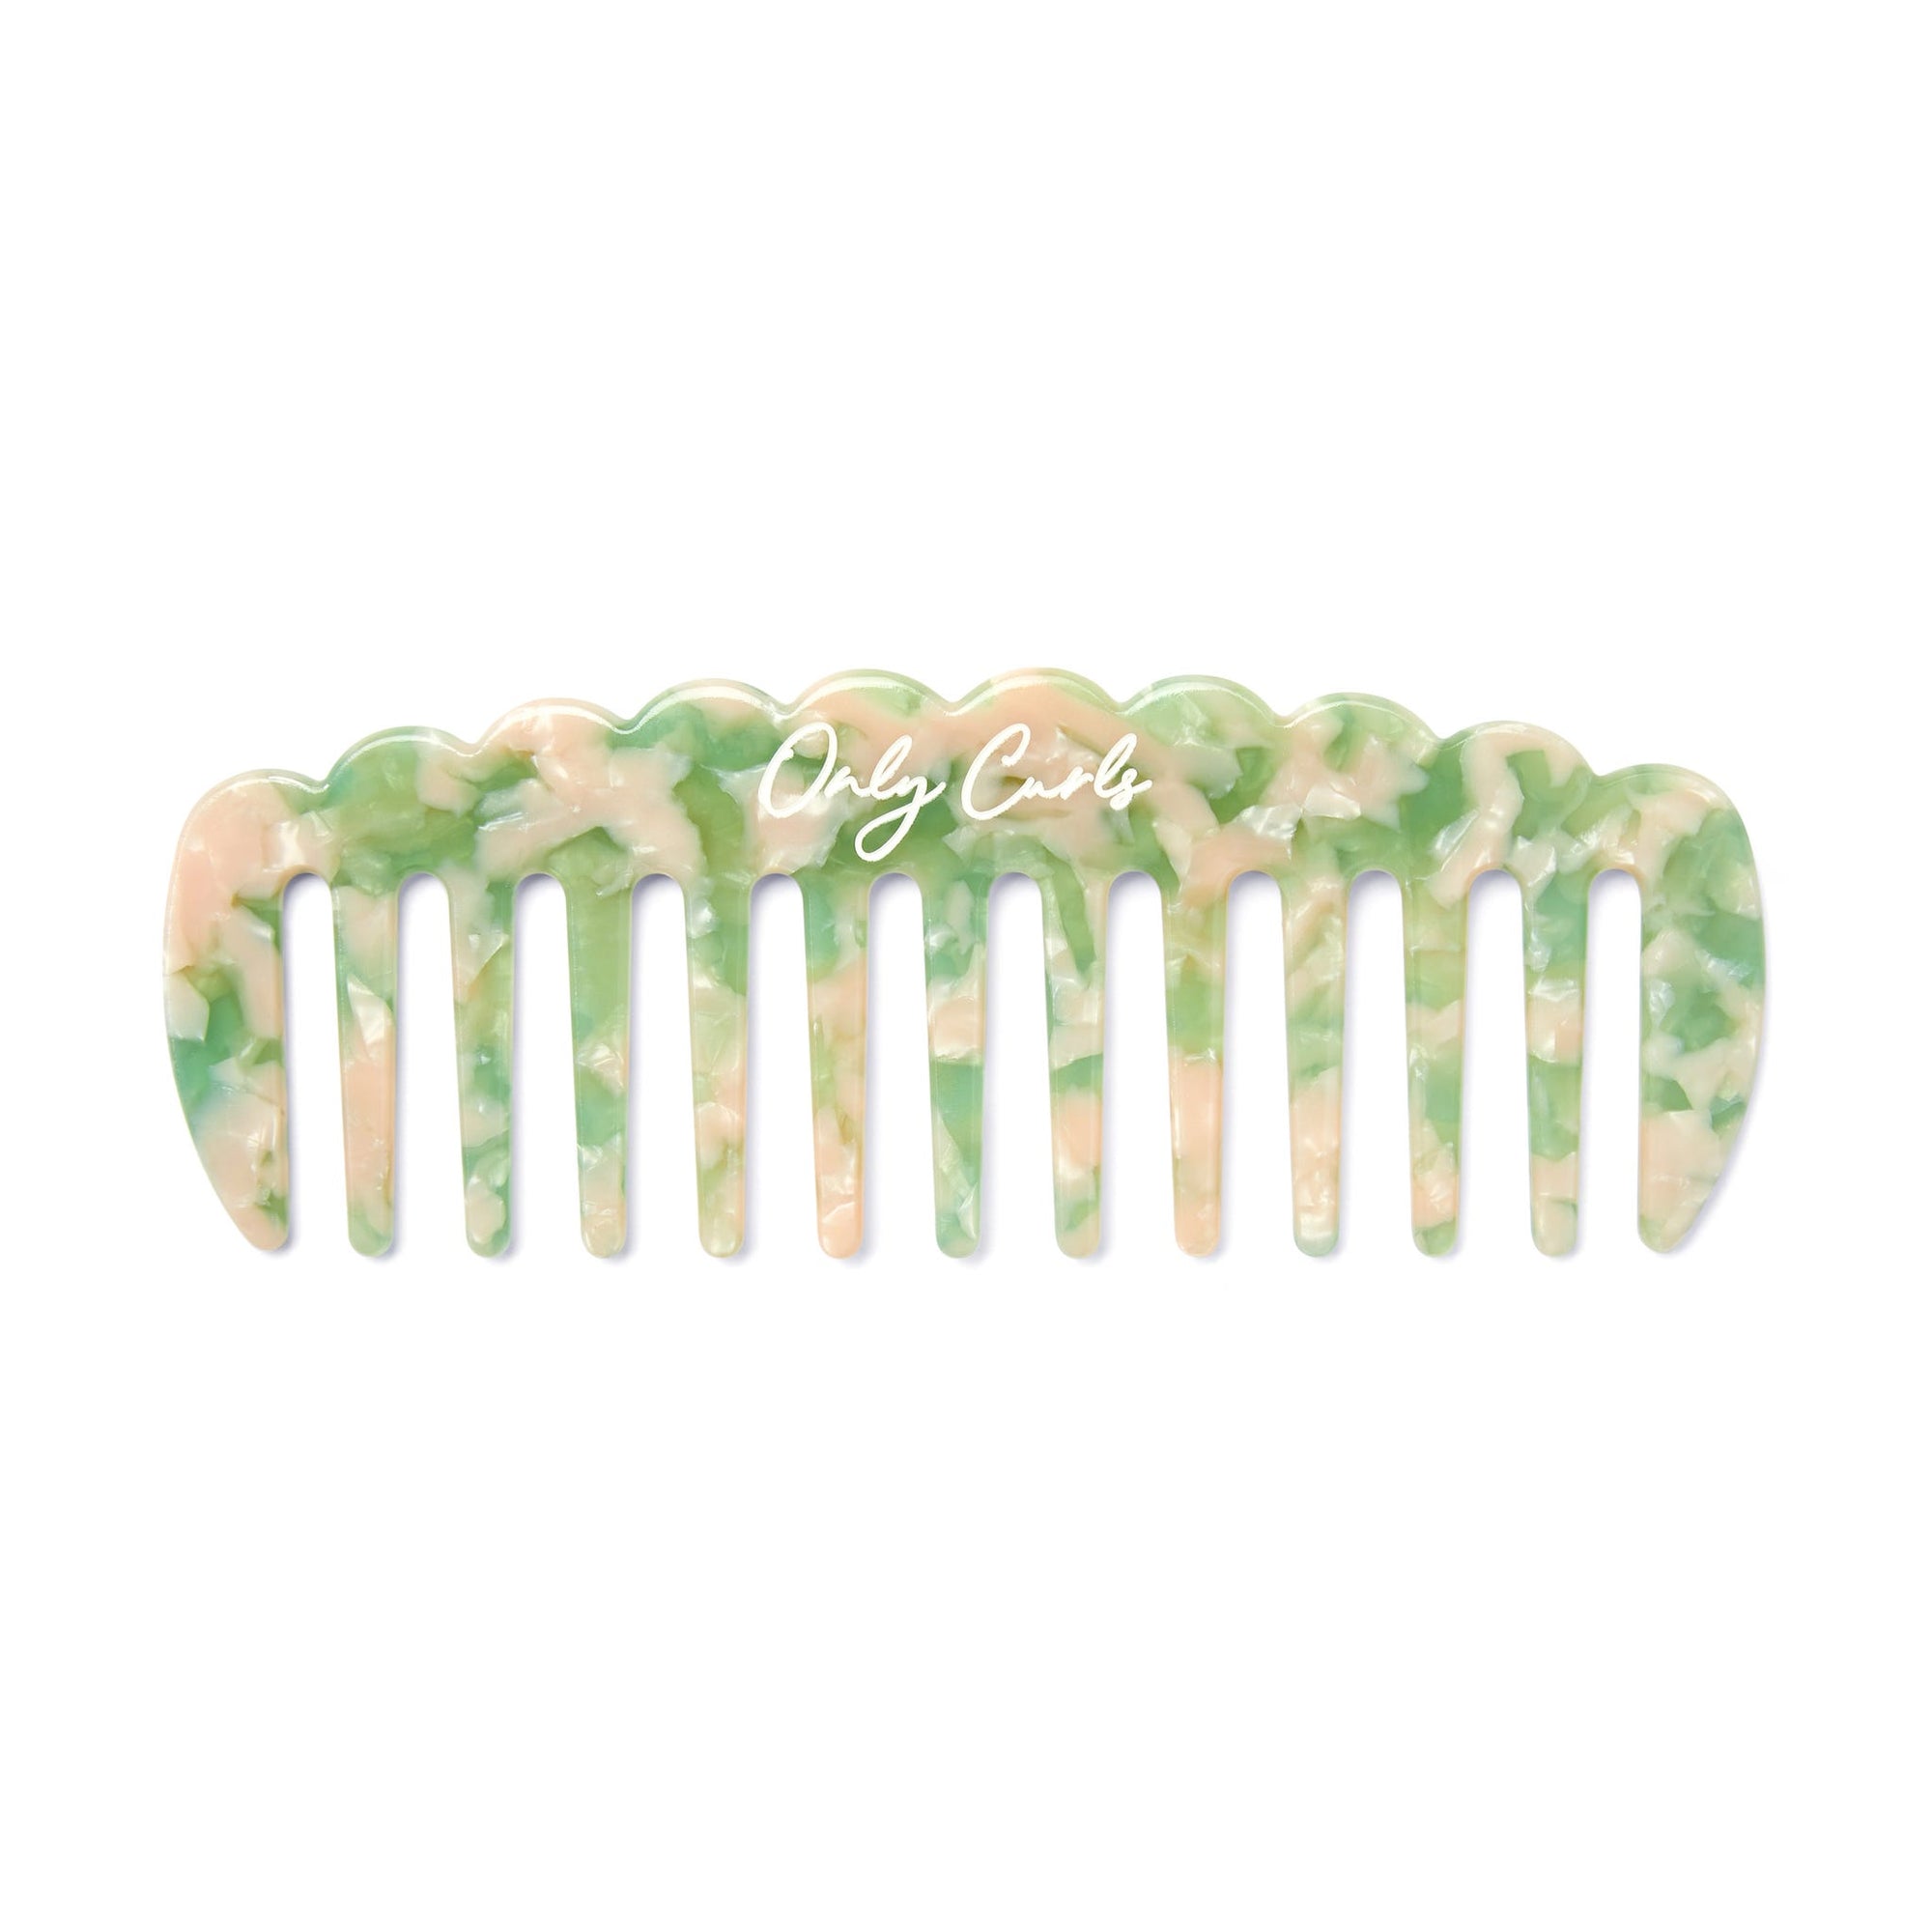 Only Curls Green Mermaid Comb - Only Curls